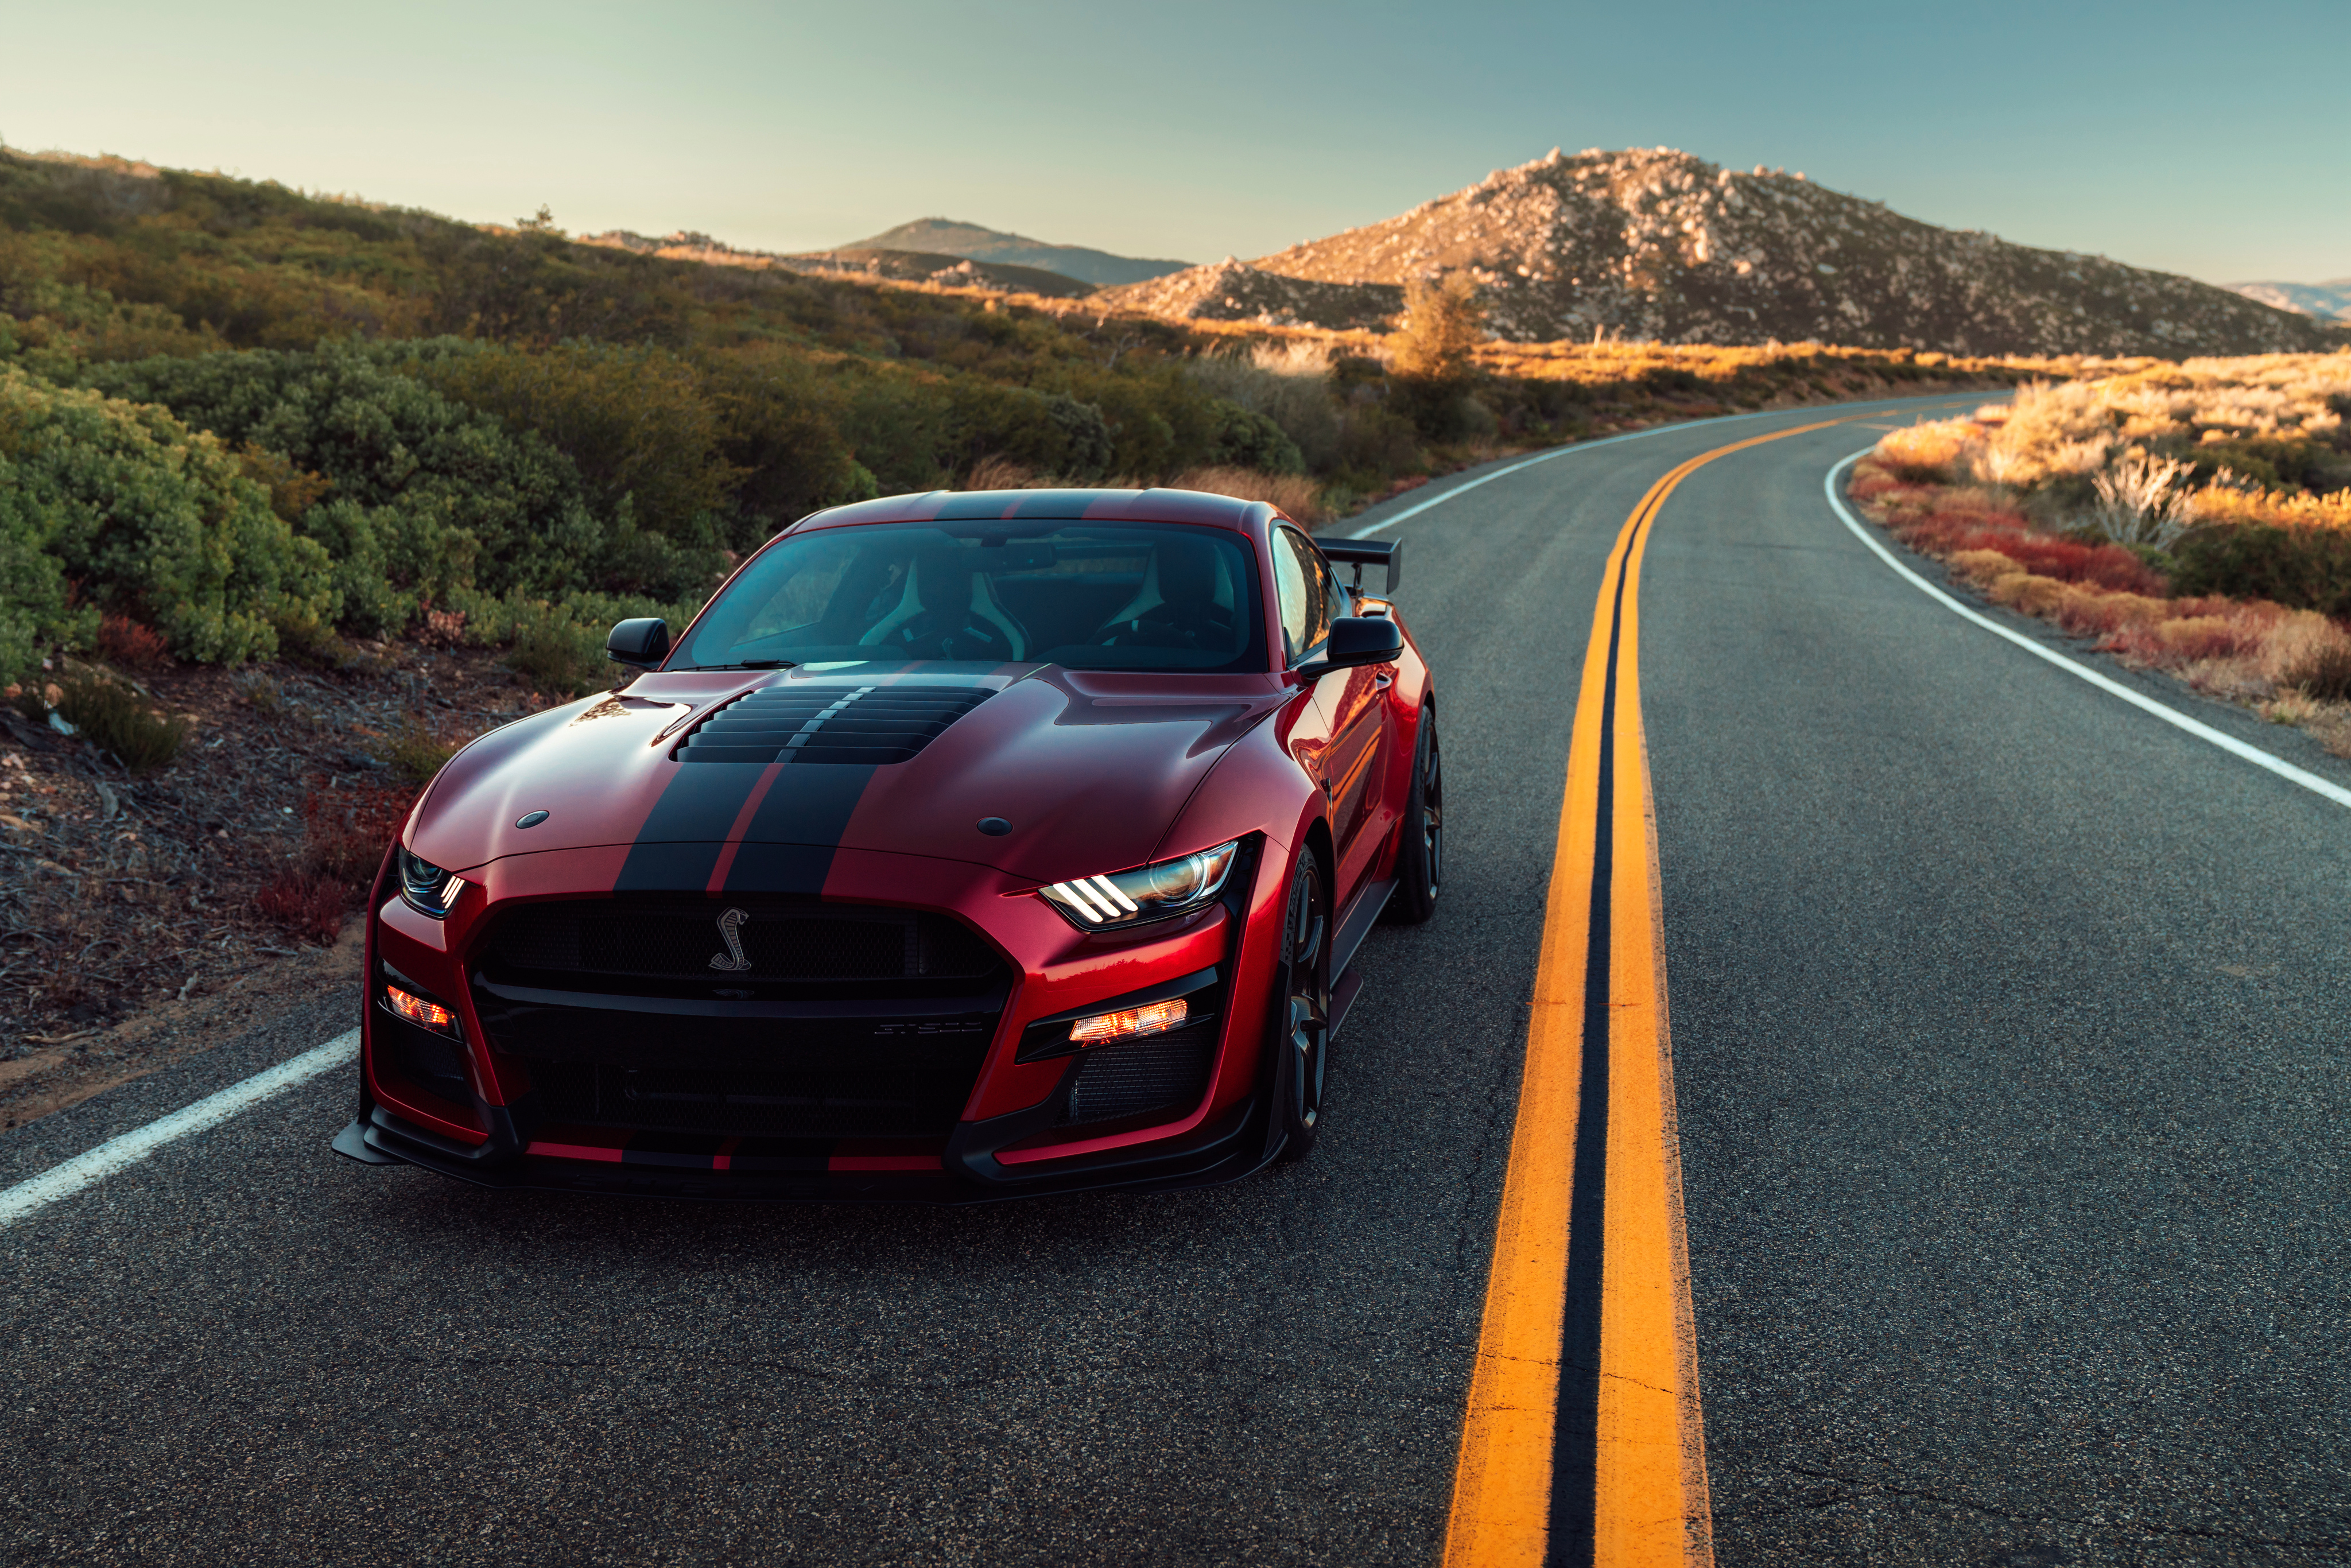 2020 Ford Mustang Shelby Gt500 4k Hd Cars 4k Wallpapers Images